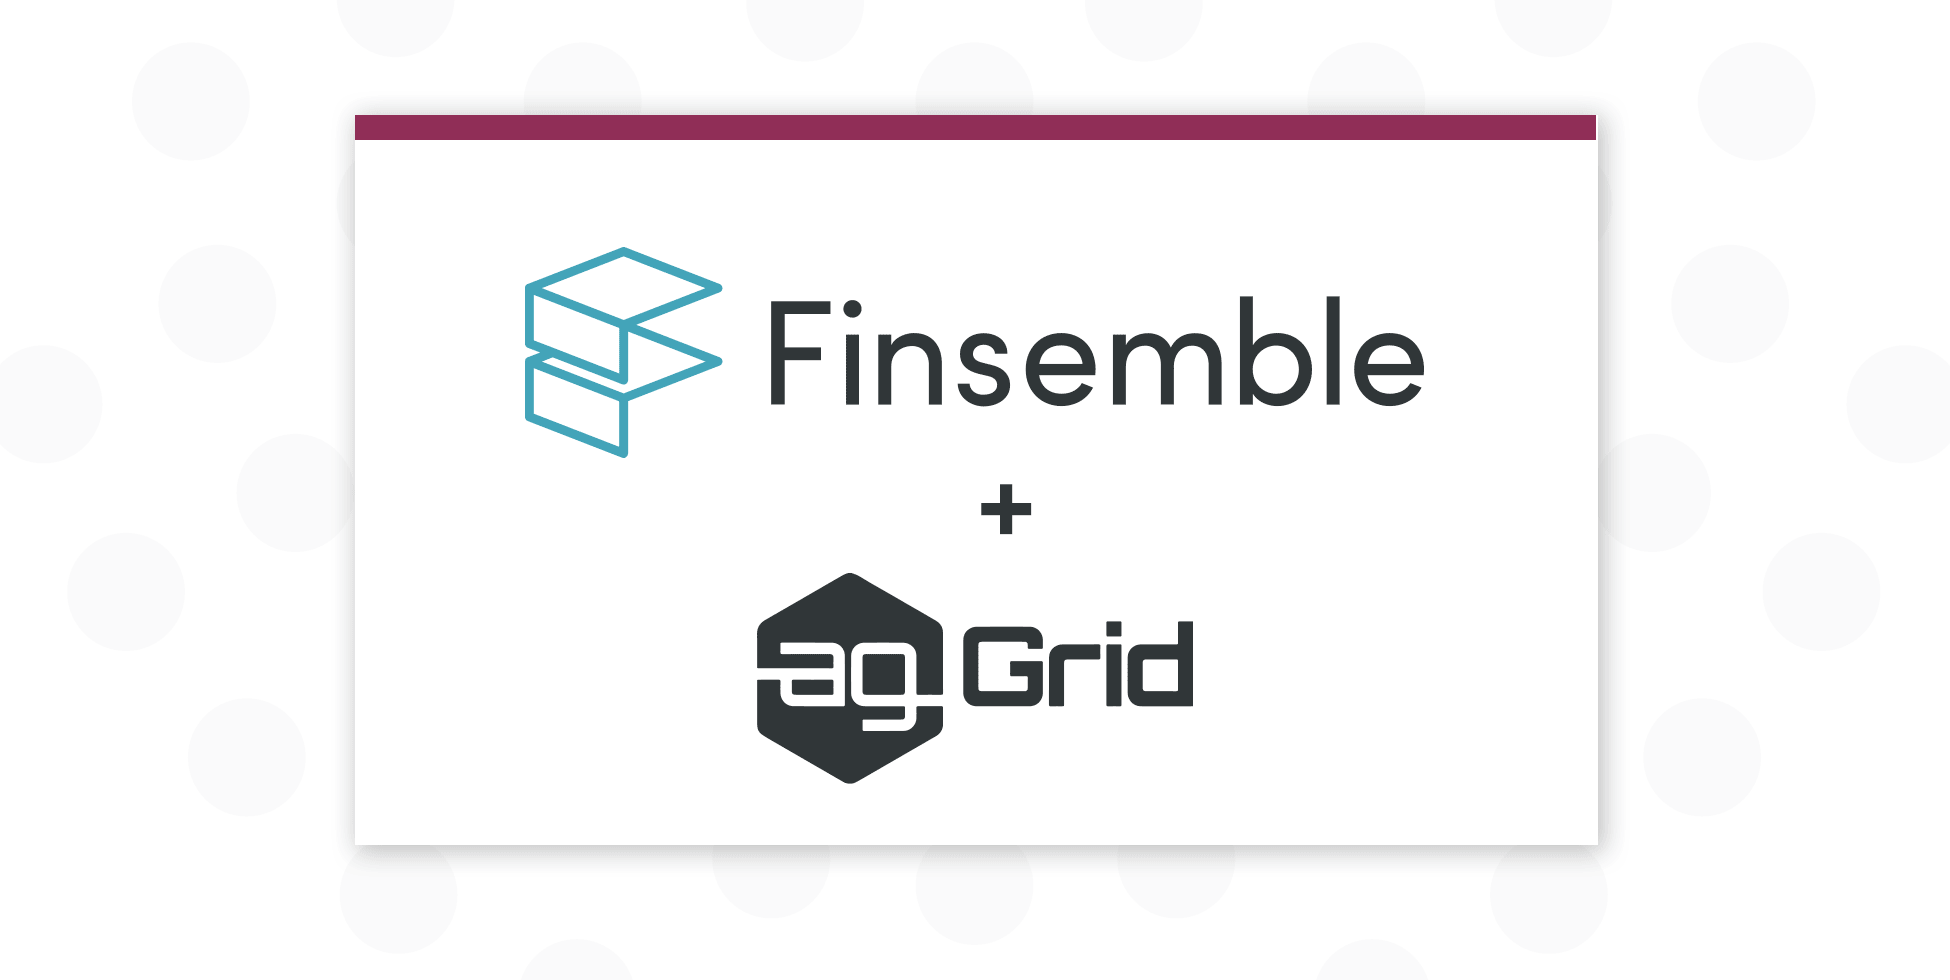 Finsemble and AG Grid logos